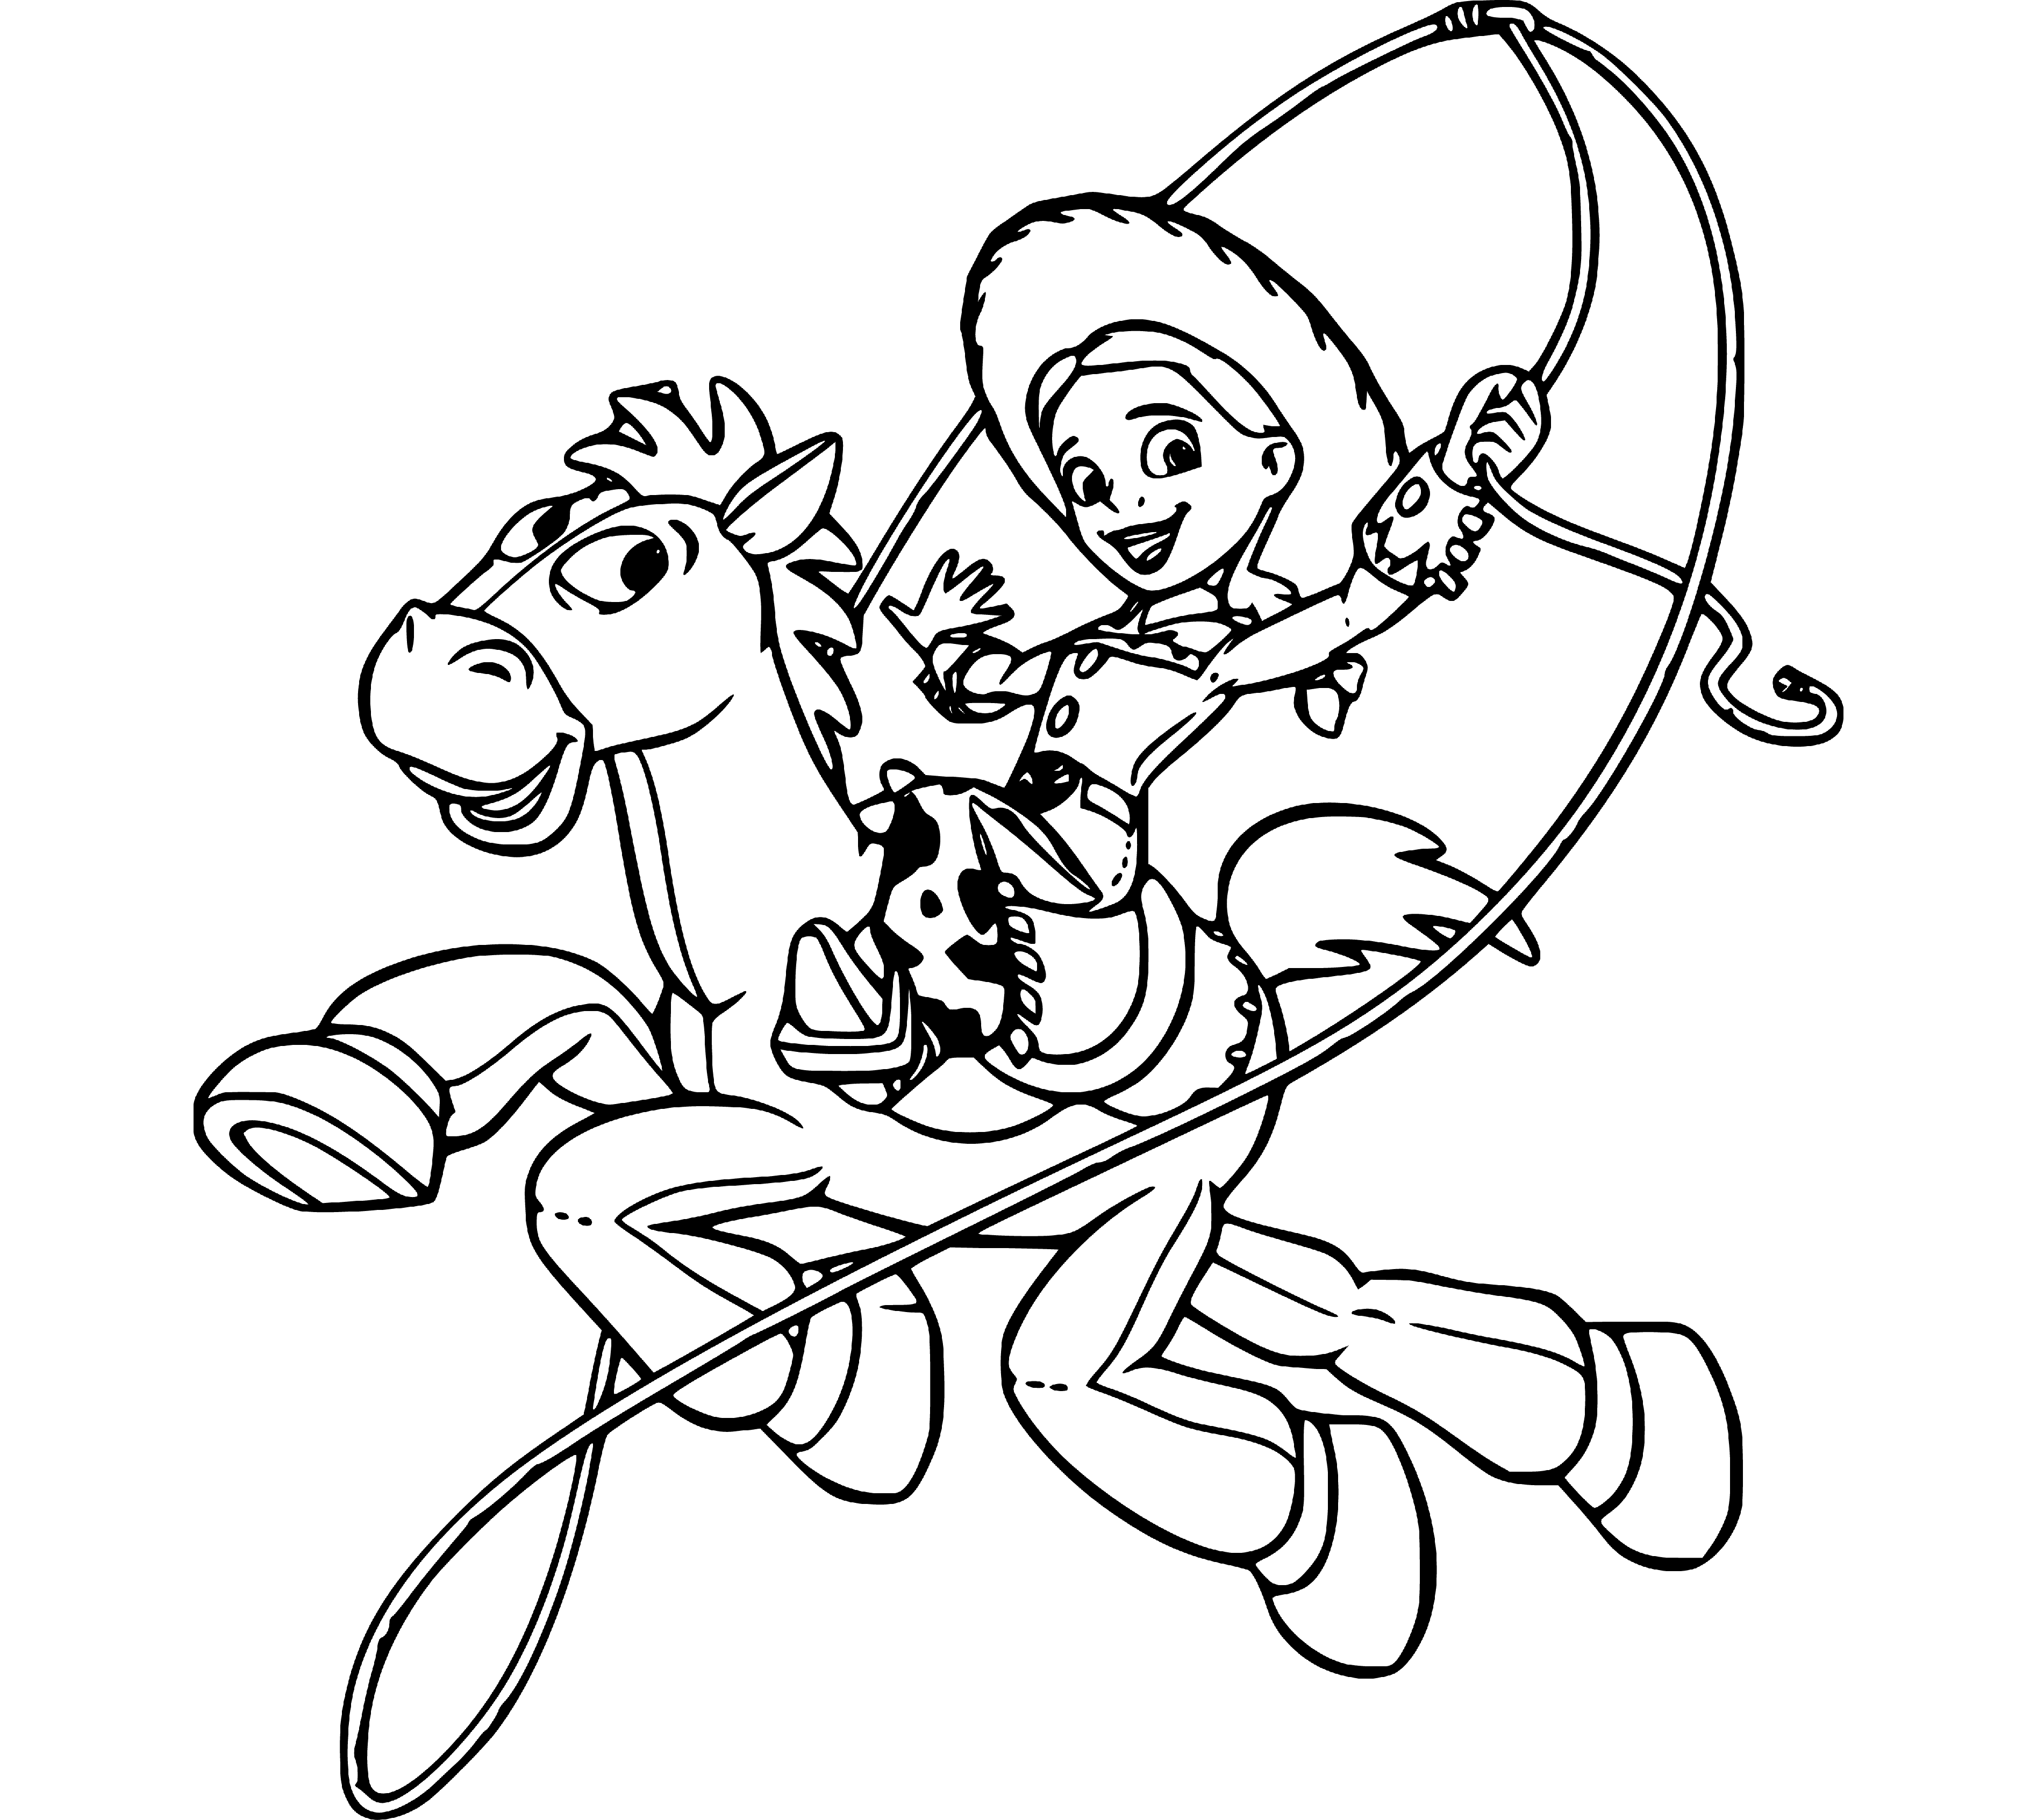 Jessie riding a horse Coloring Pages (Toy Story) - SheetalColor.com